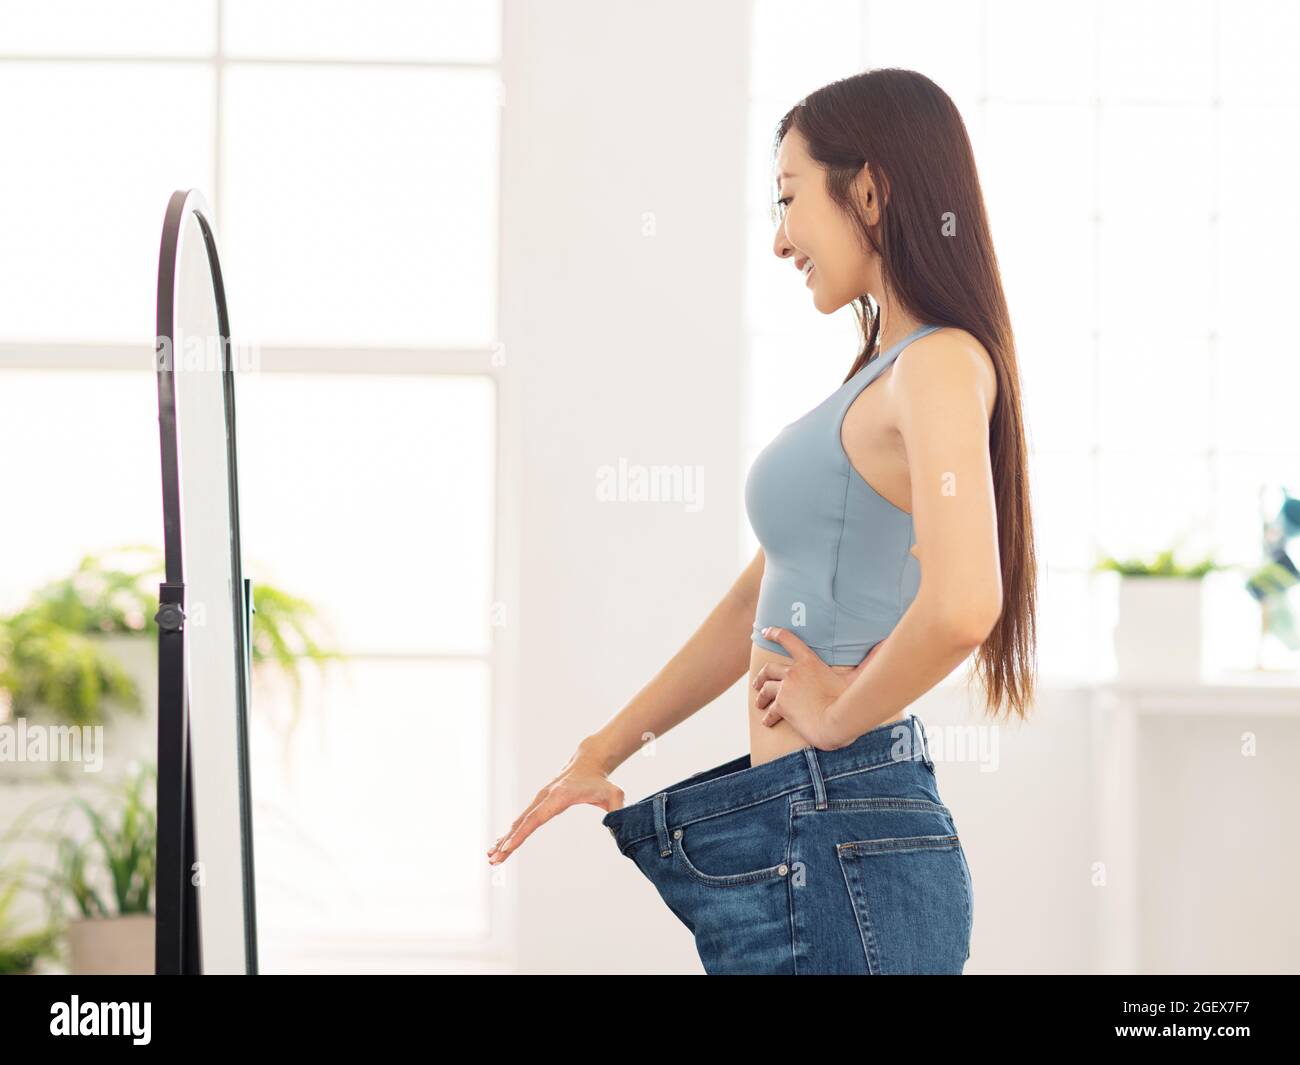 Young woman in jeans large size standing in front of mirror.Weight Loss. Stock Photo